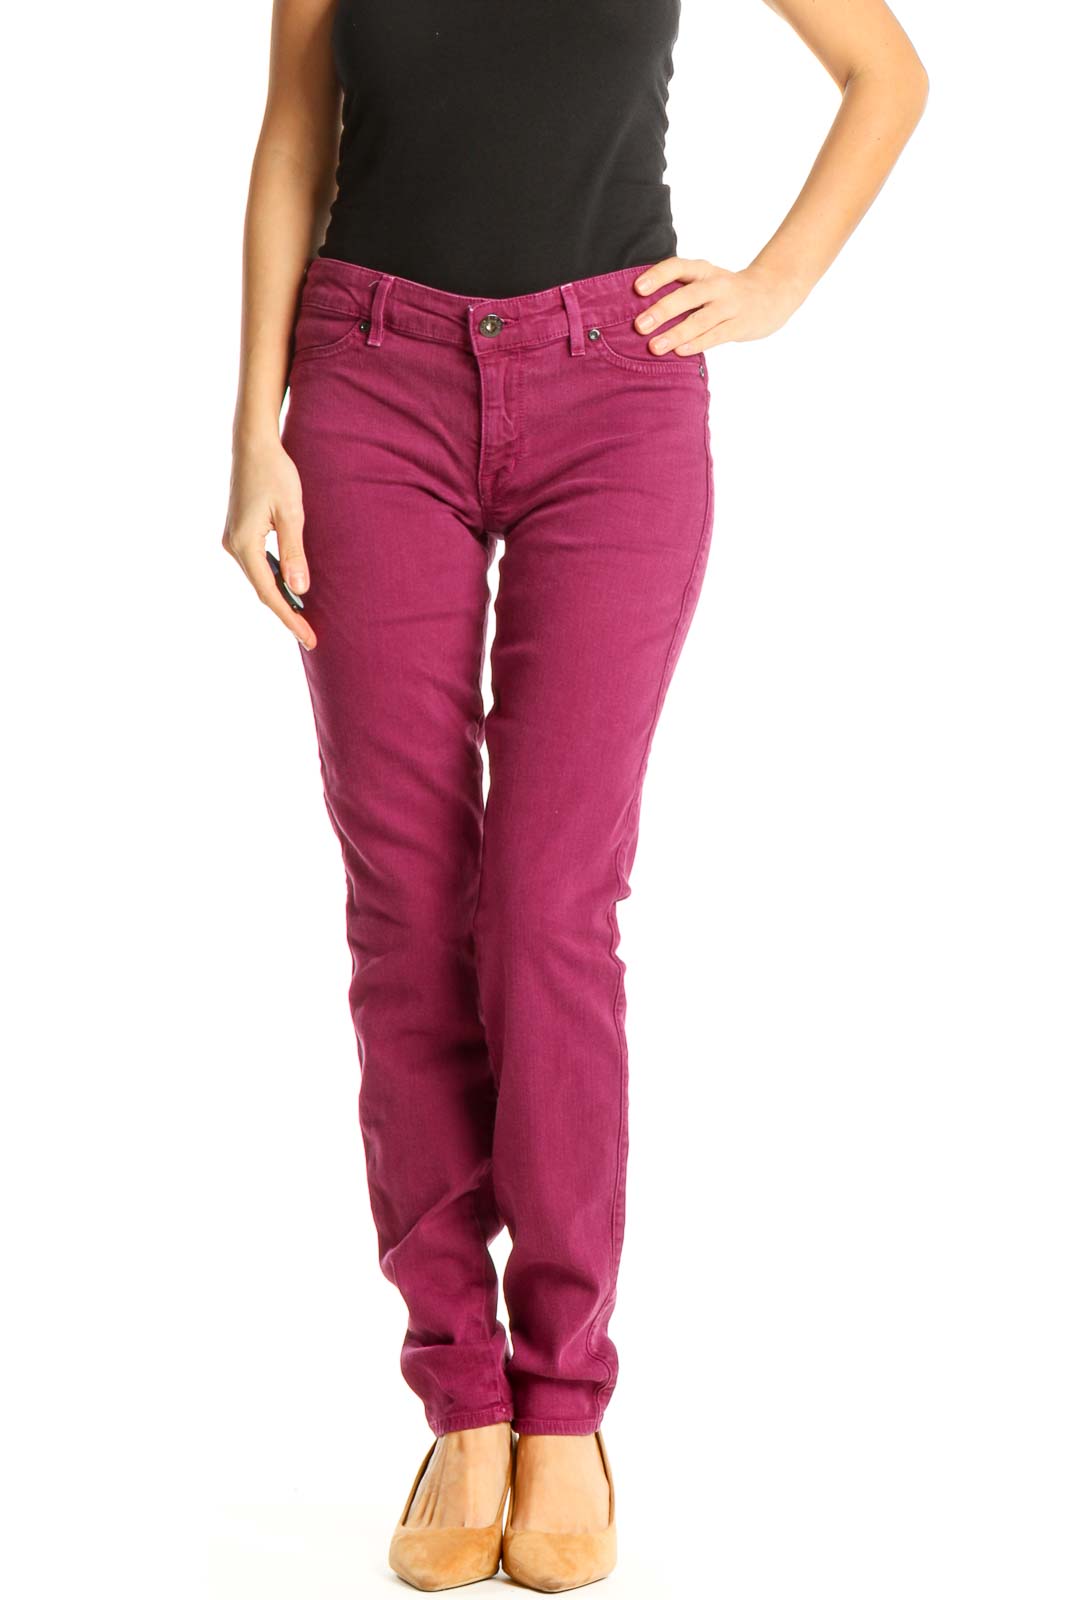 Pink Solid Casual Pants Front